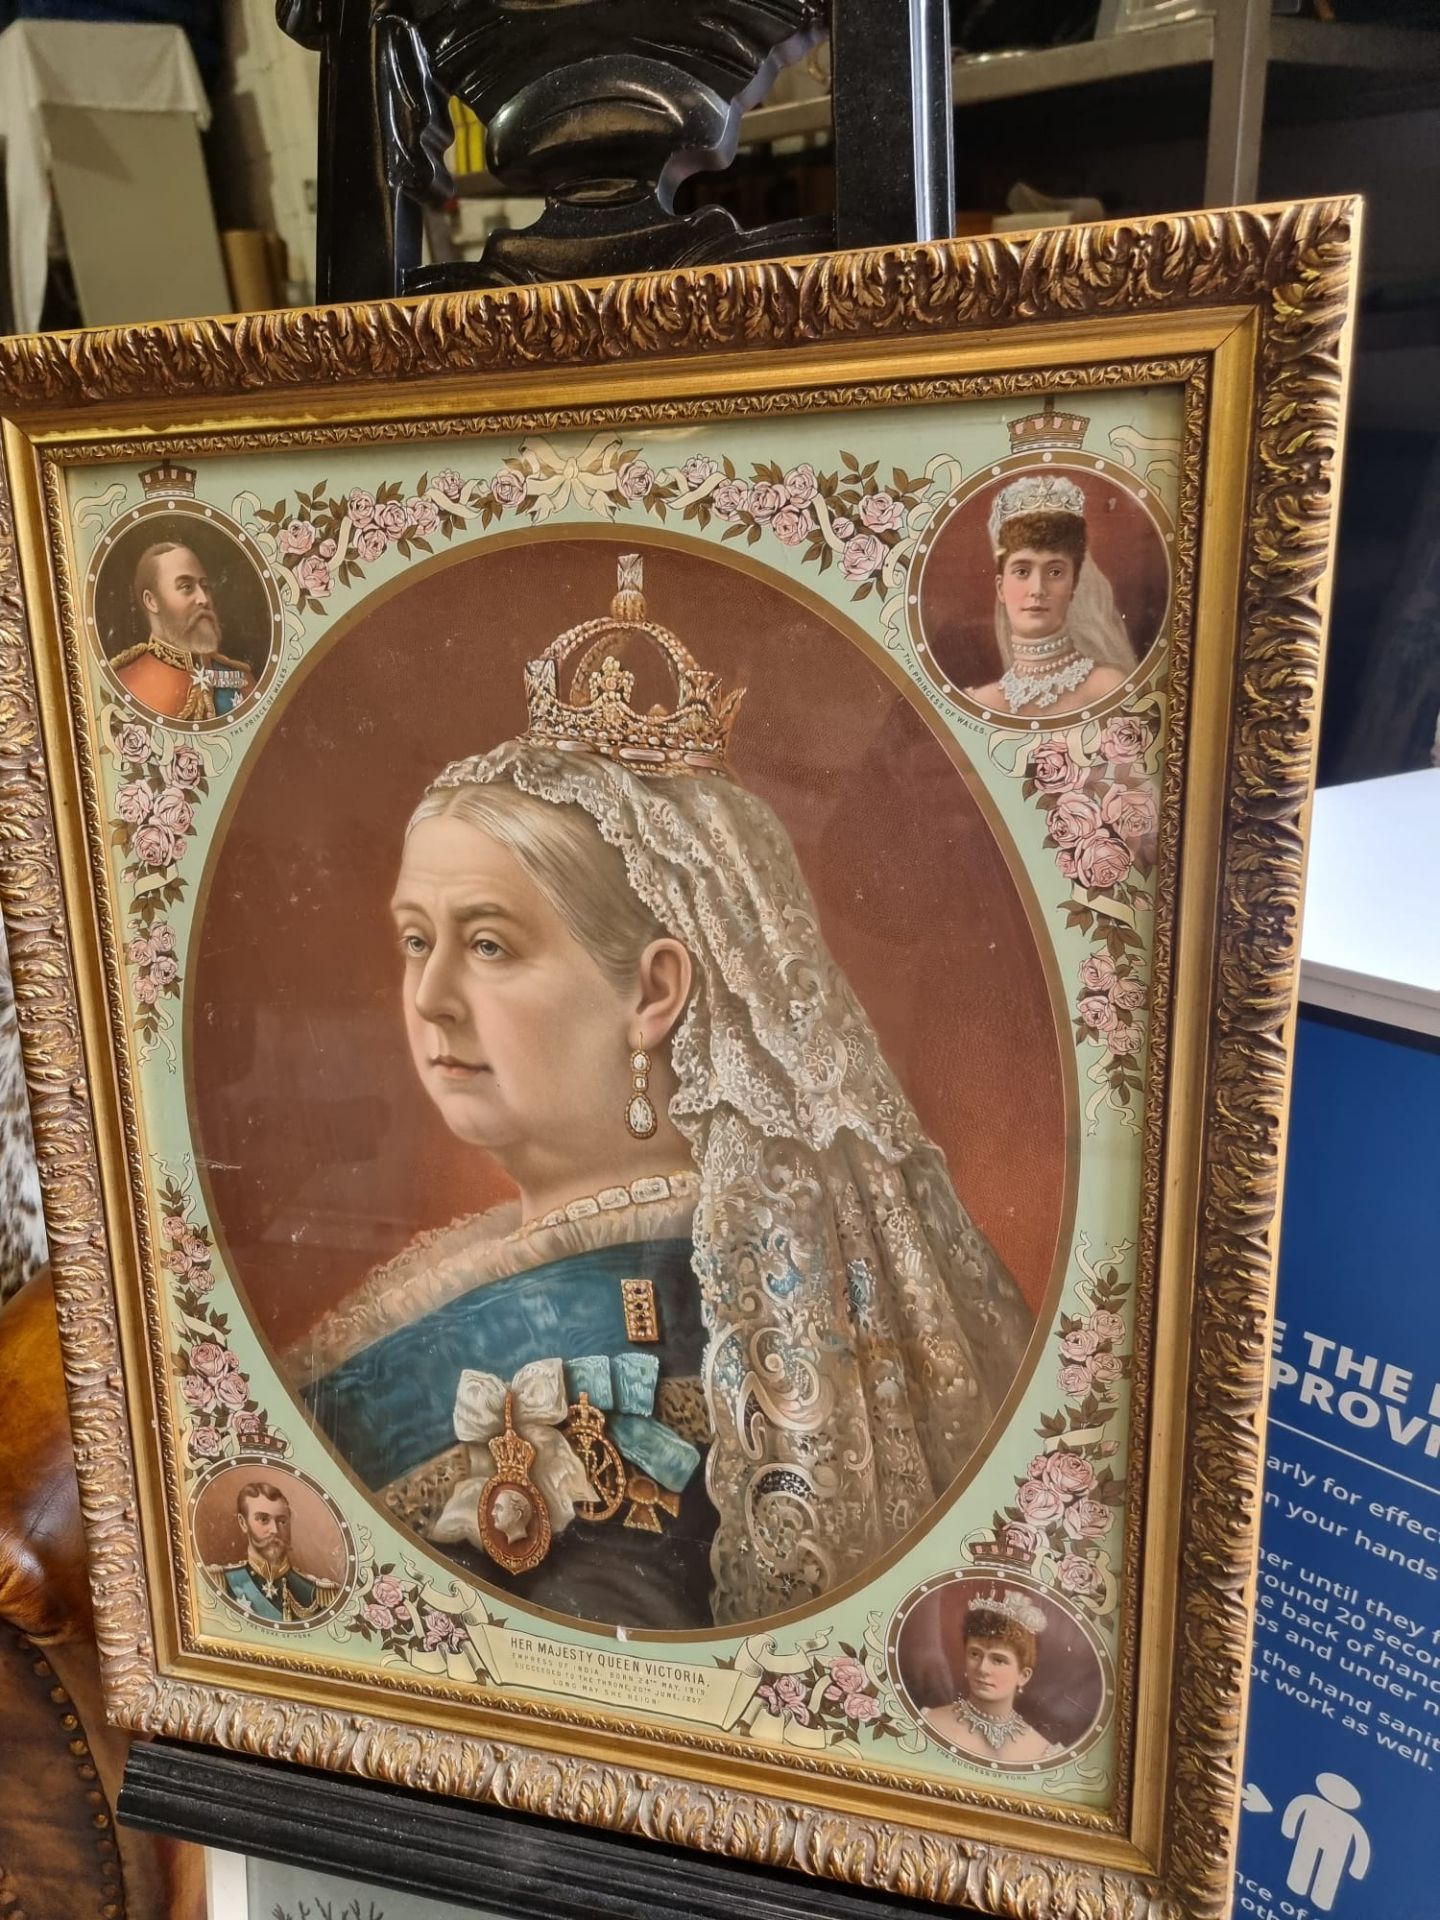 A Framed Print Of Queen Victoria With Inscription Plate Under Her Majesty Queen Victoria Empress - Image 2 of 9